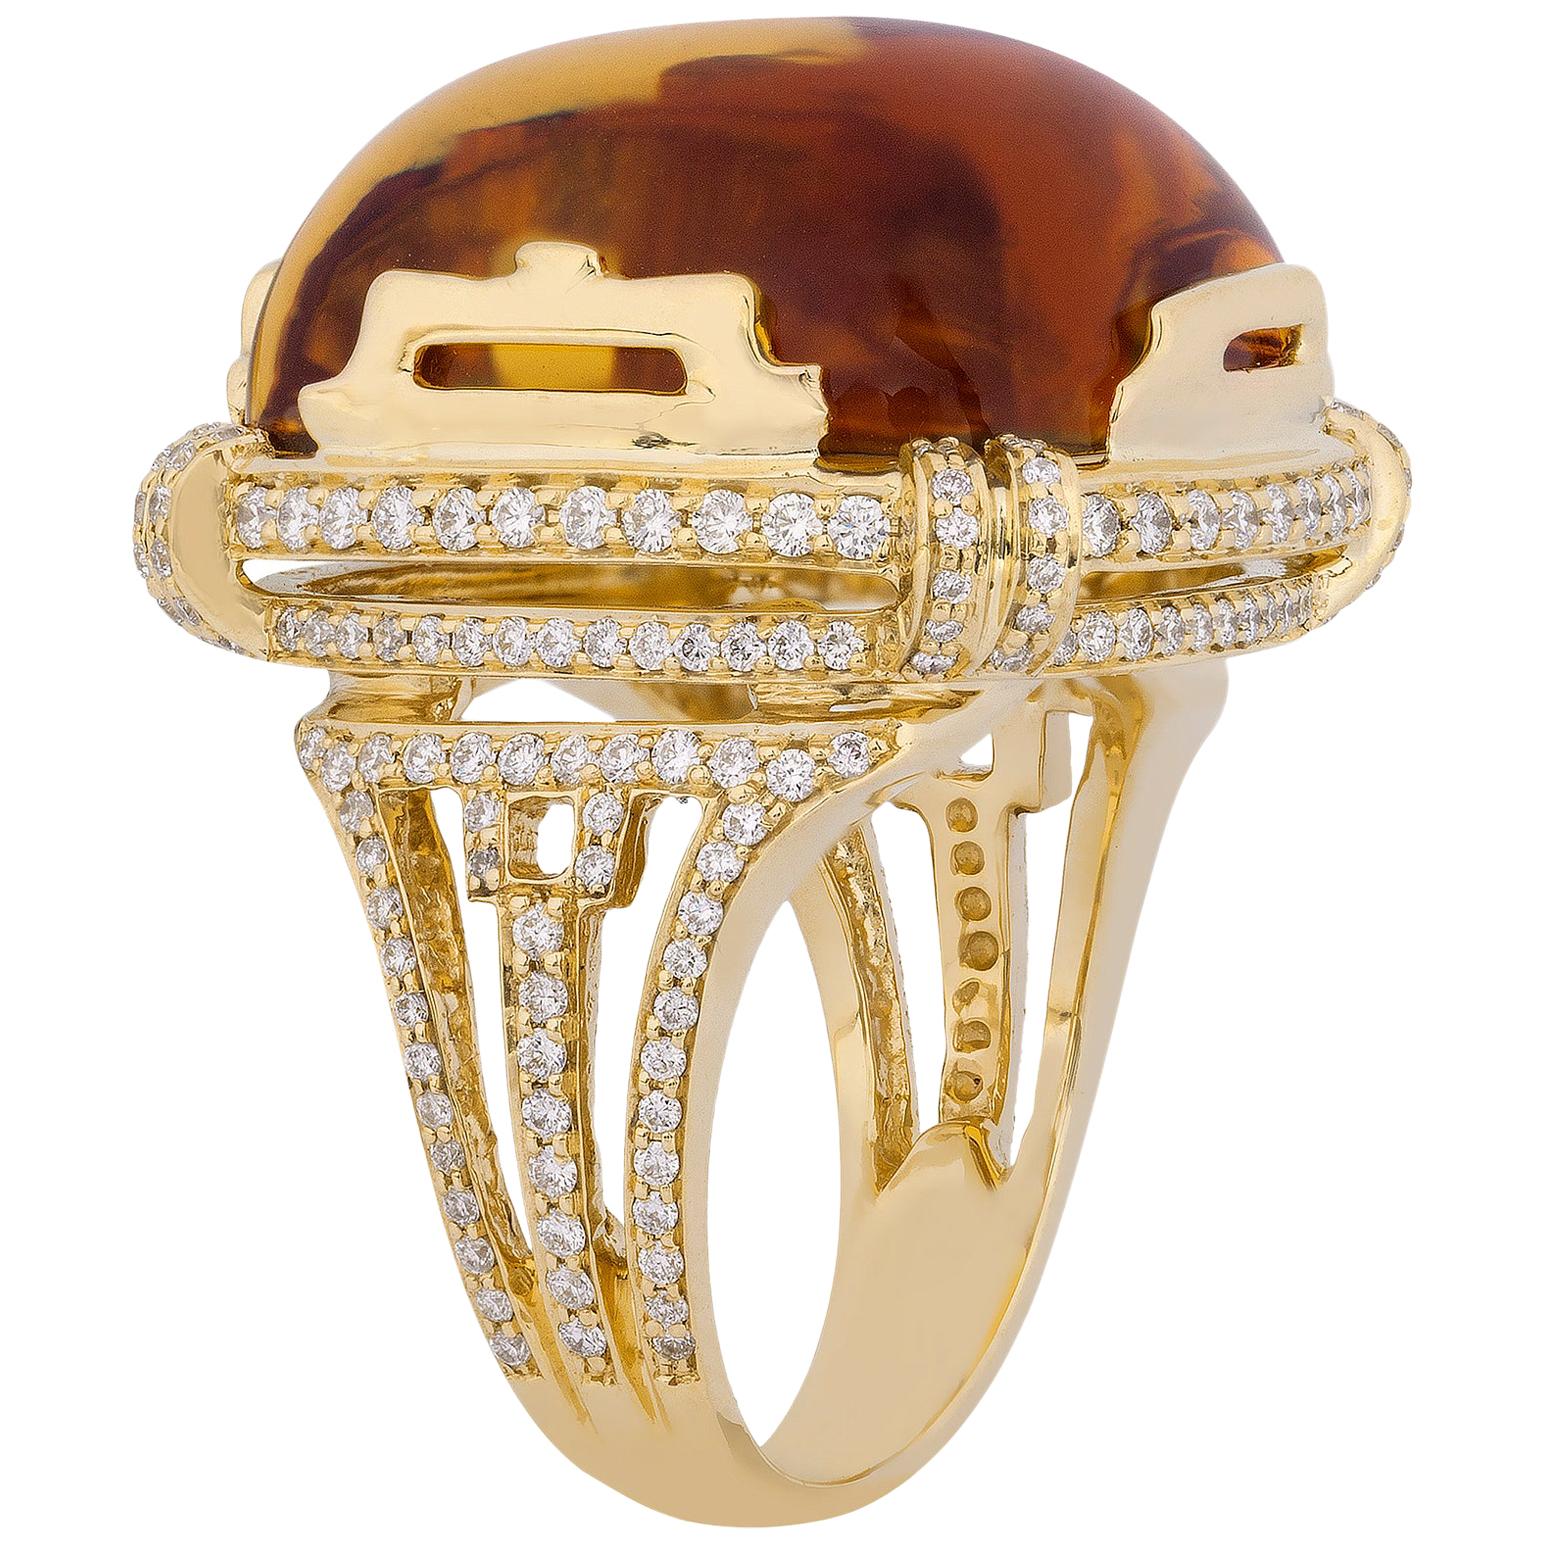 Citrine Cushion Cabochon Ring in 18K Yellow Gold with Diamonds, from 'Rock N' Roll' Collection. Extensive collection of big and bold pieces. Like the music, this Rock ‘n Roll collection is electric in color and very stimulating to the eye. These